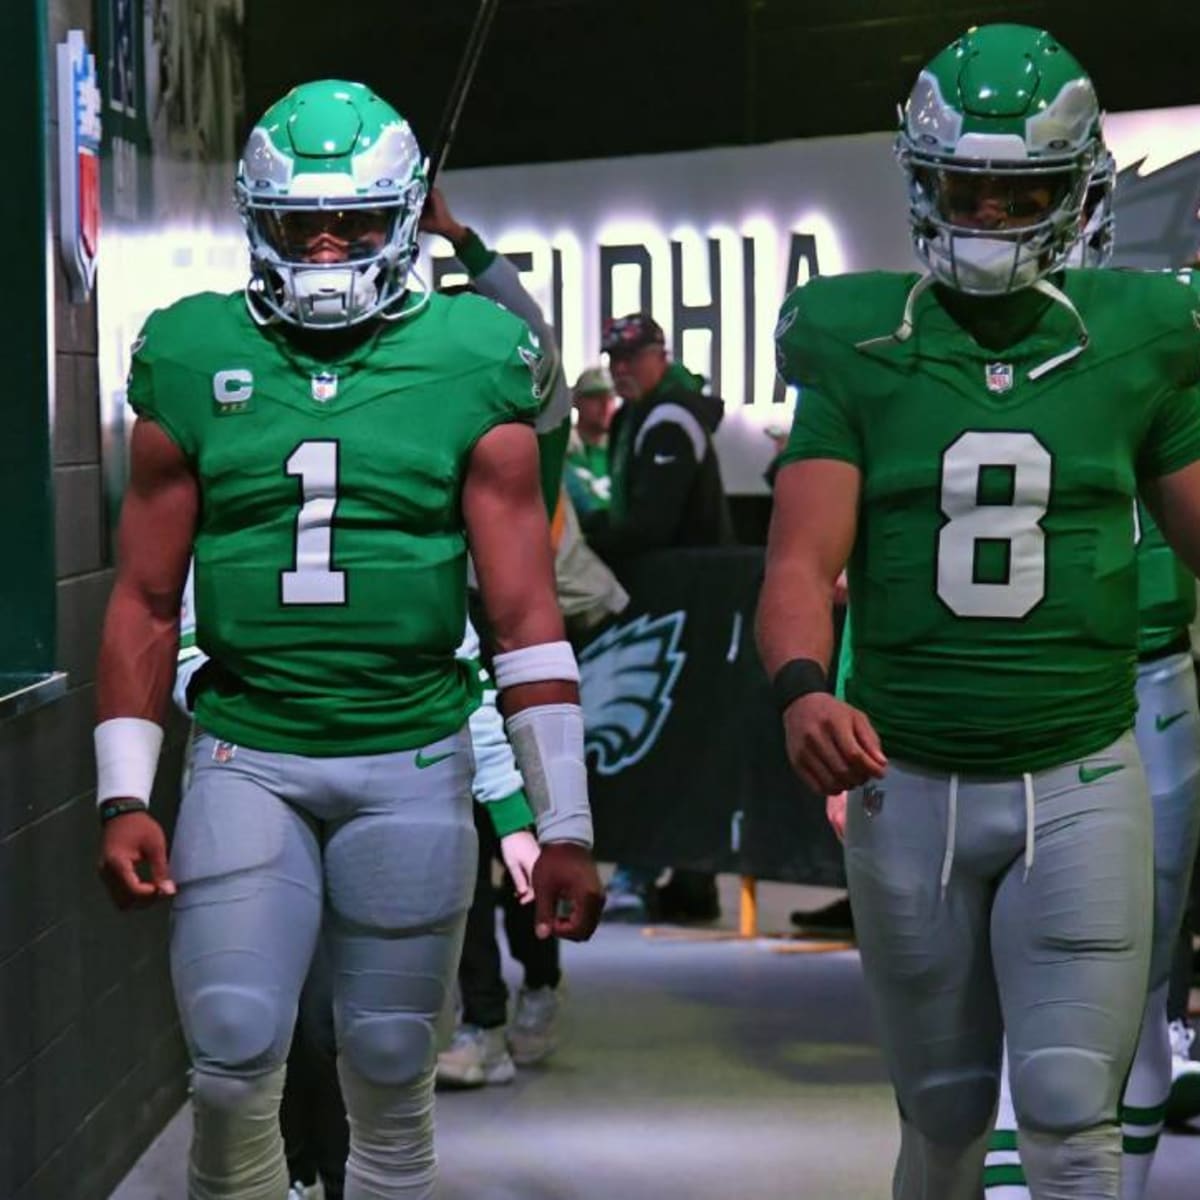 Eagles' Throwback Kelly Green Uniforms Were Absolutely Loved by